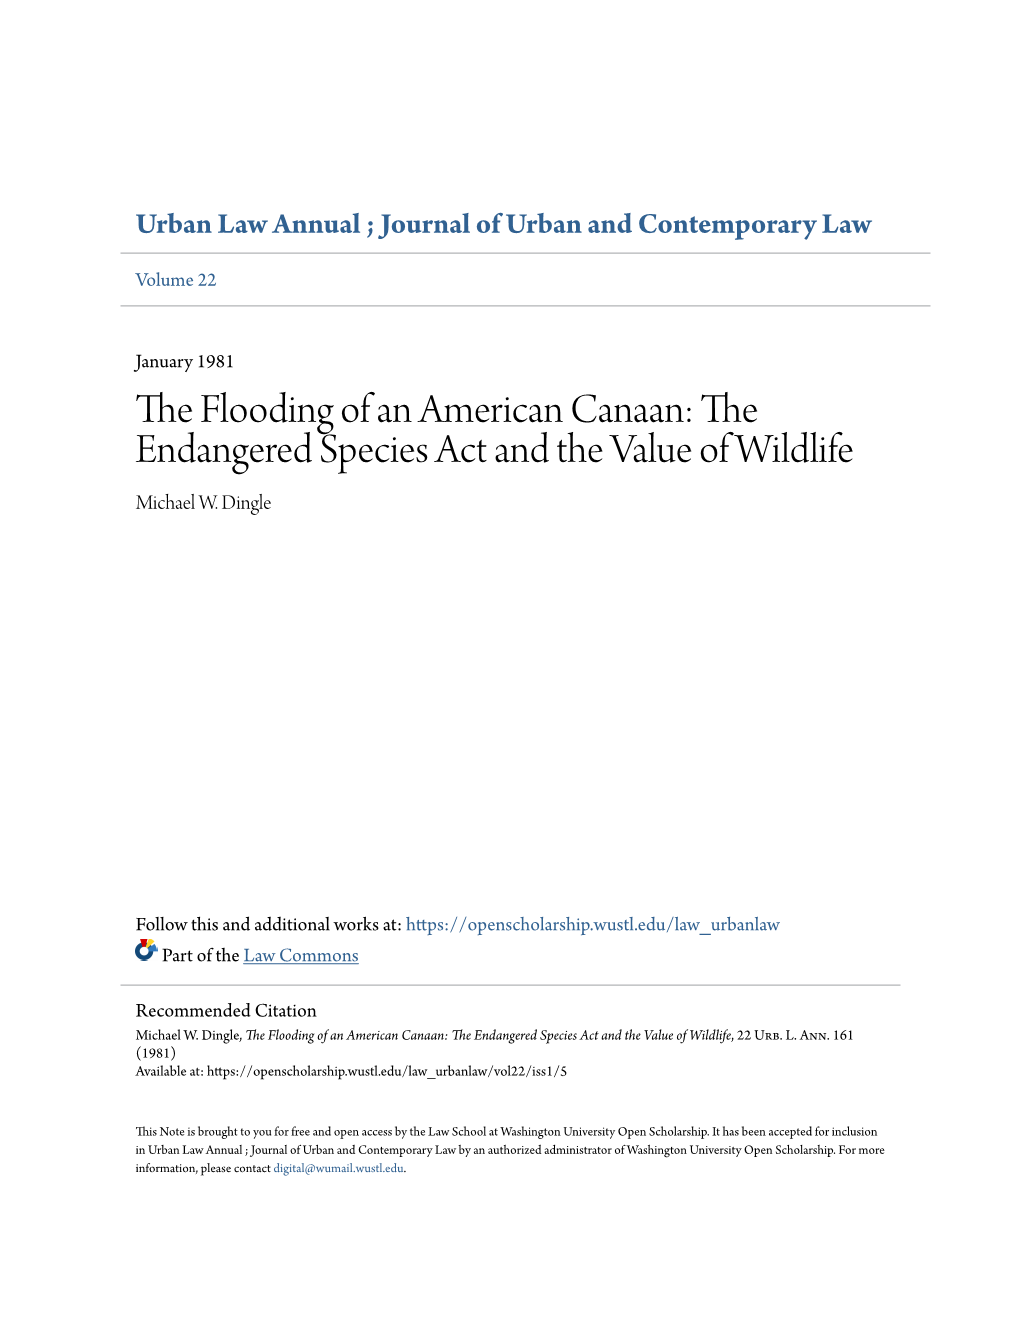 The Endangered Species Act and the Value of Wildlife Michael W